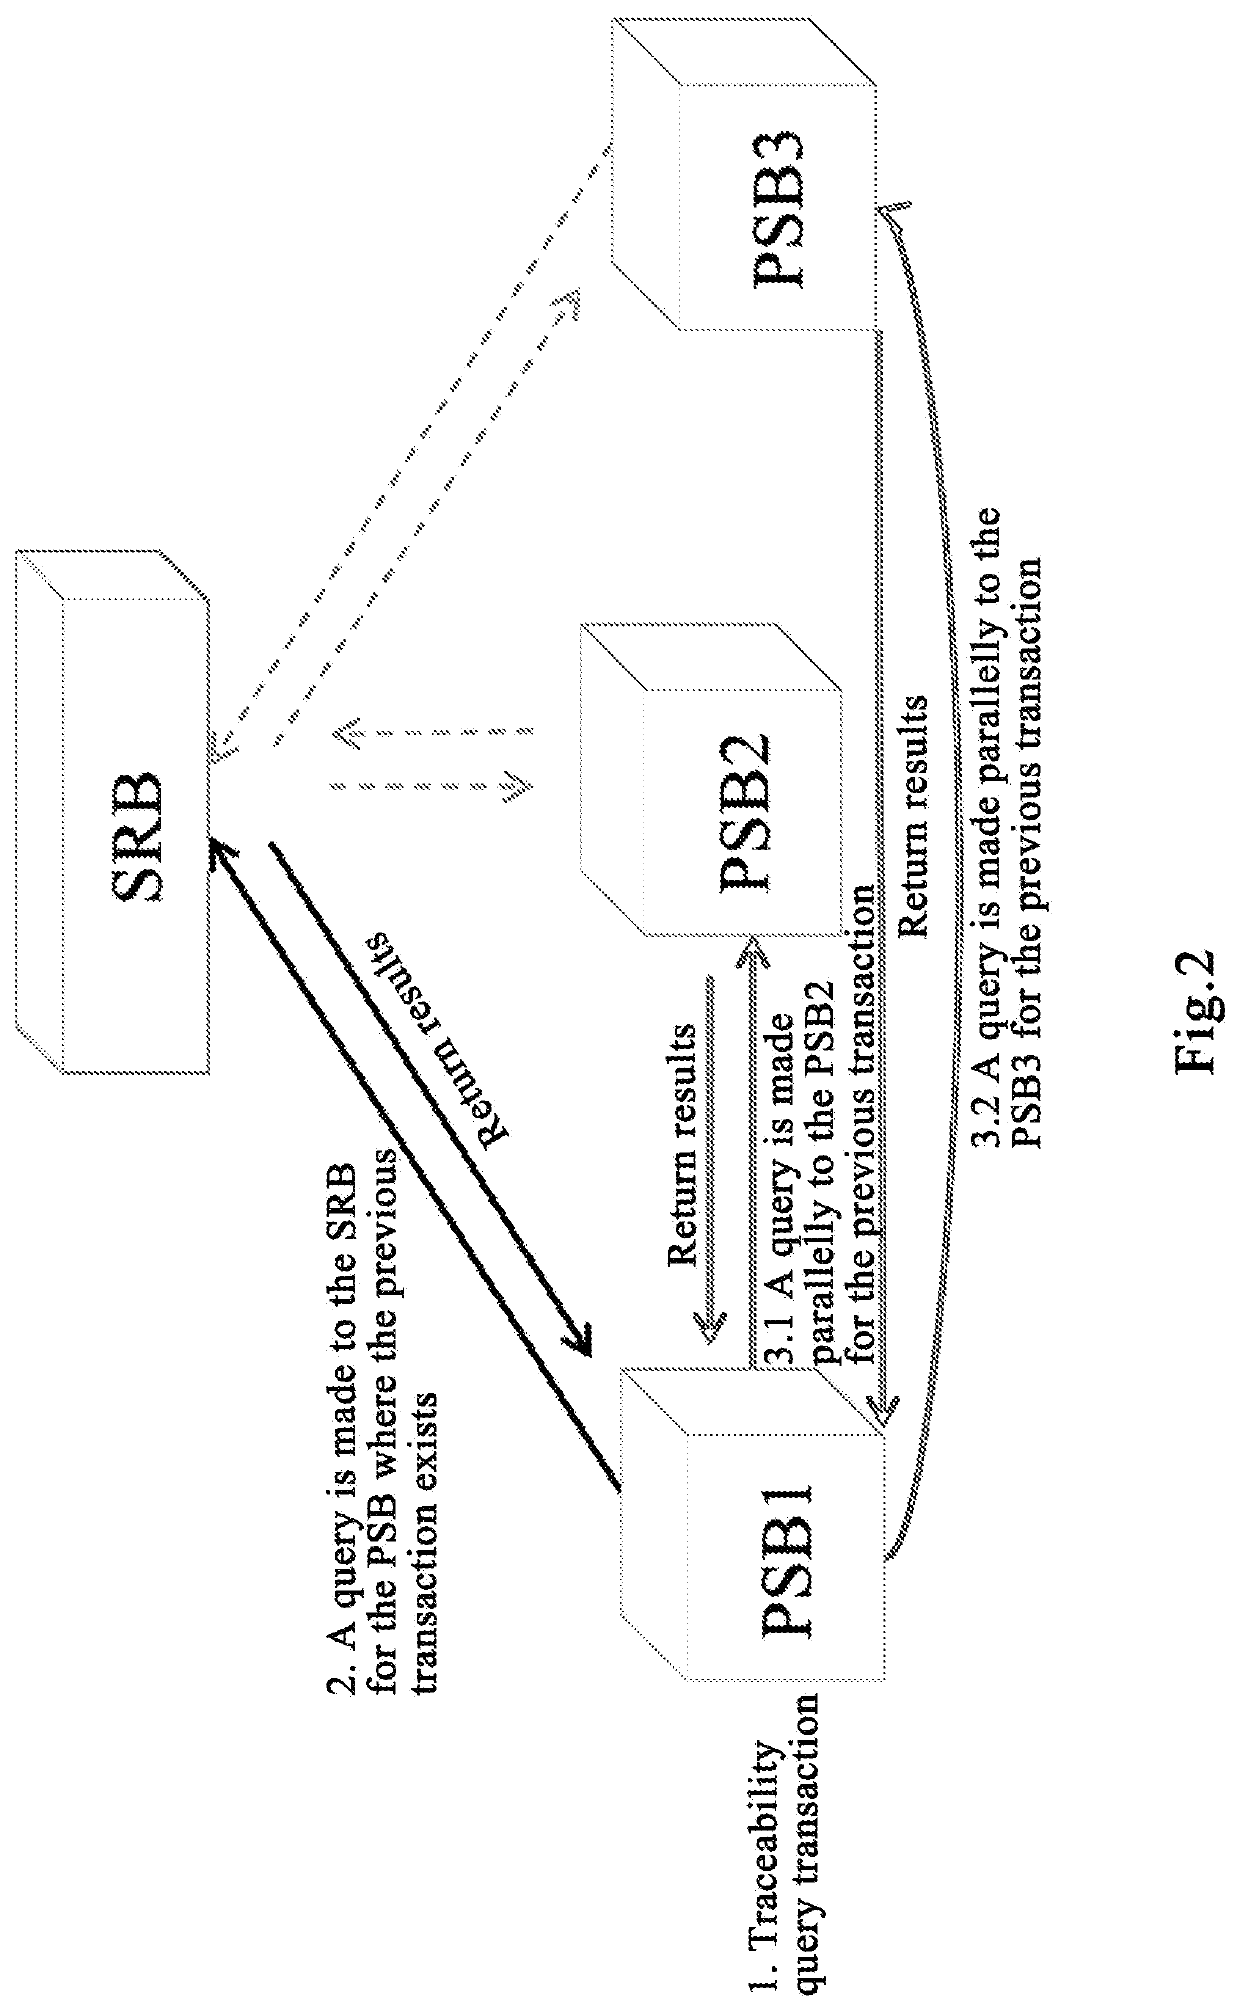 Method for high-performance traceability query oriented to multi-chain data association